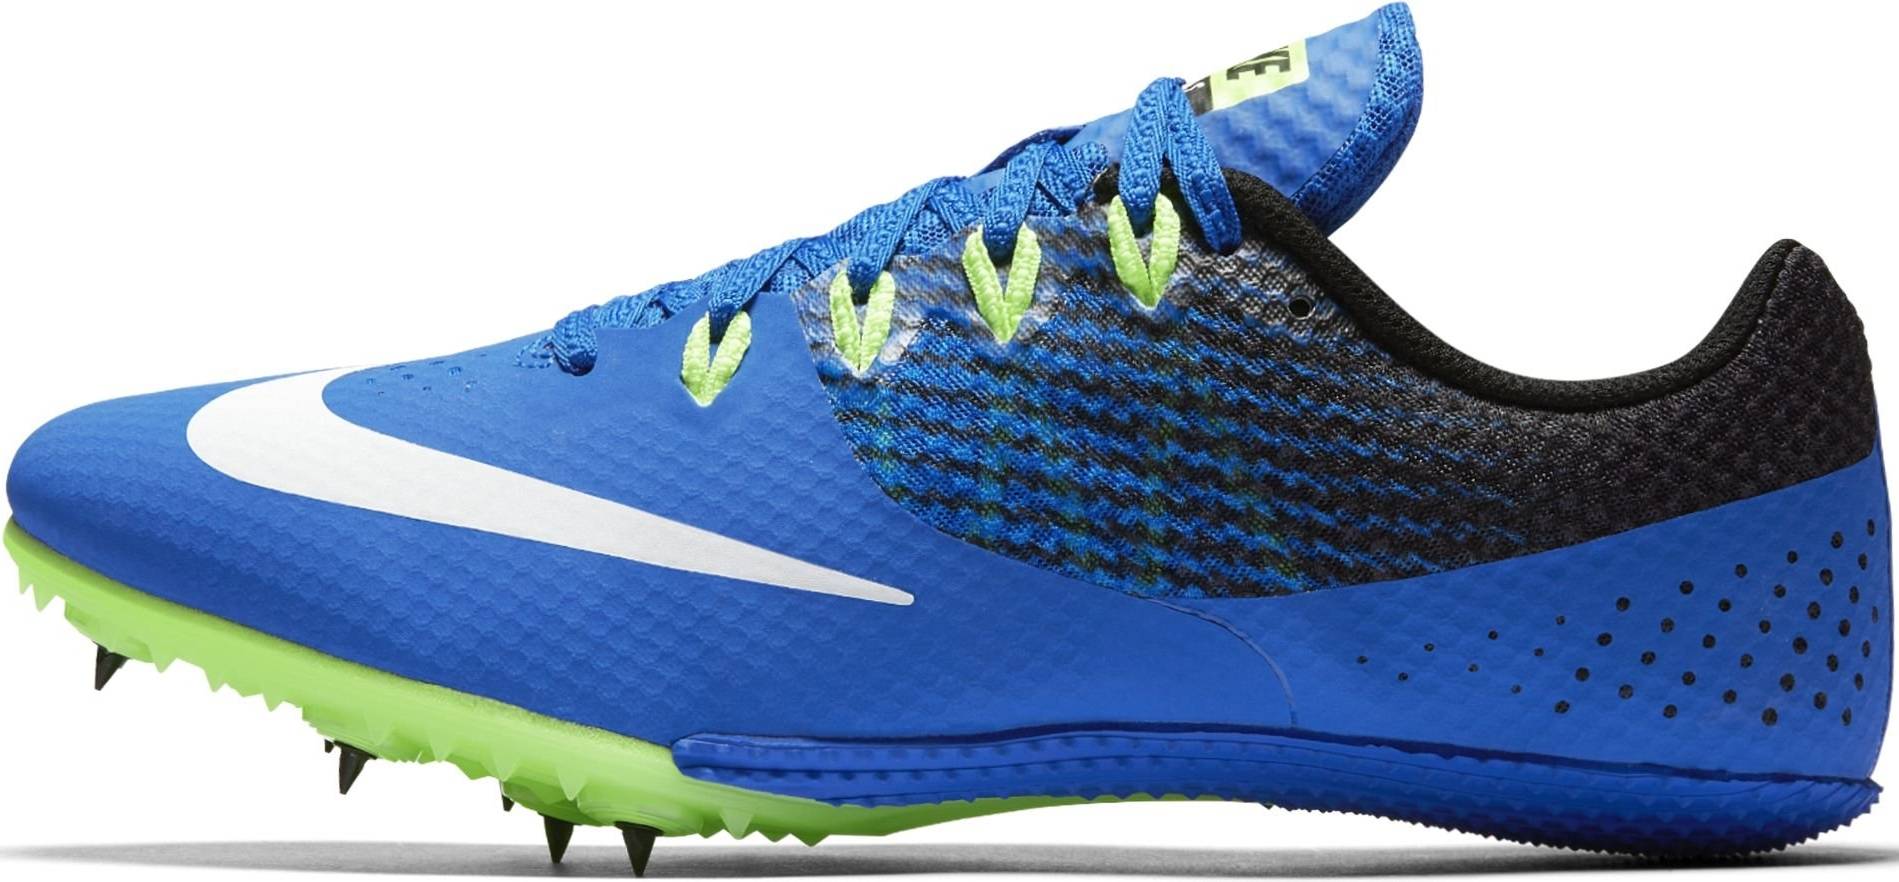 nike zoom rival s 8 running spikes